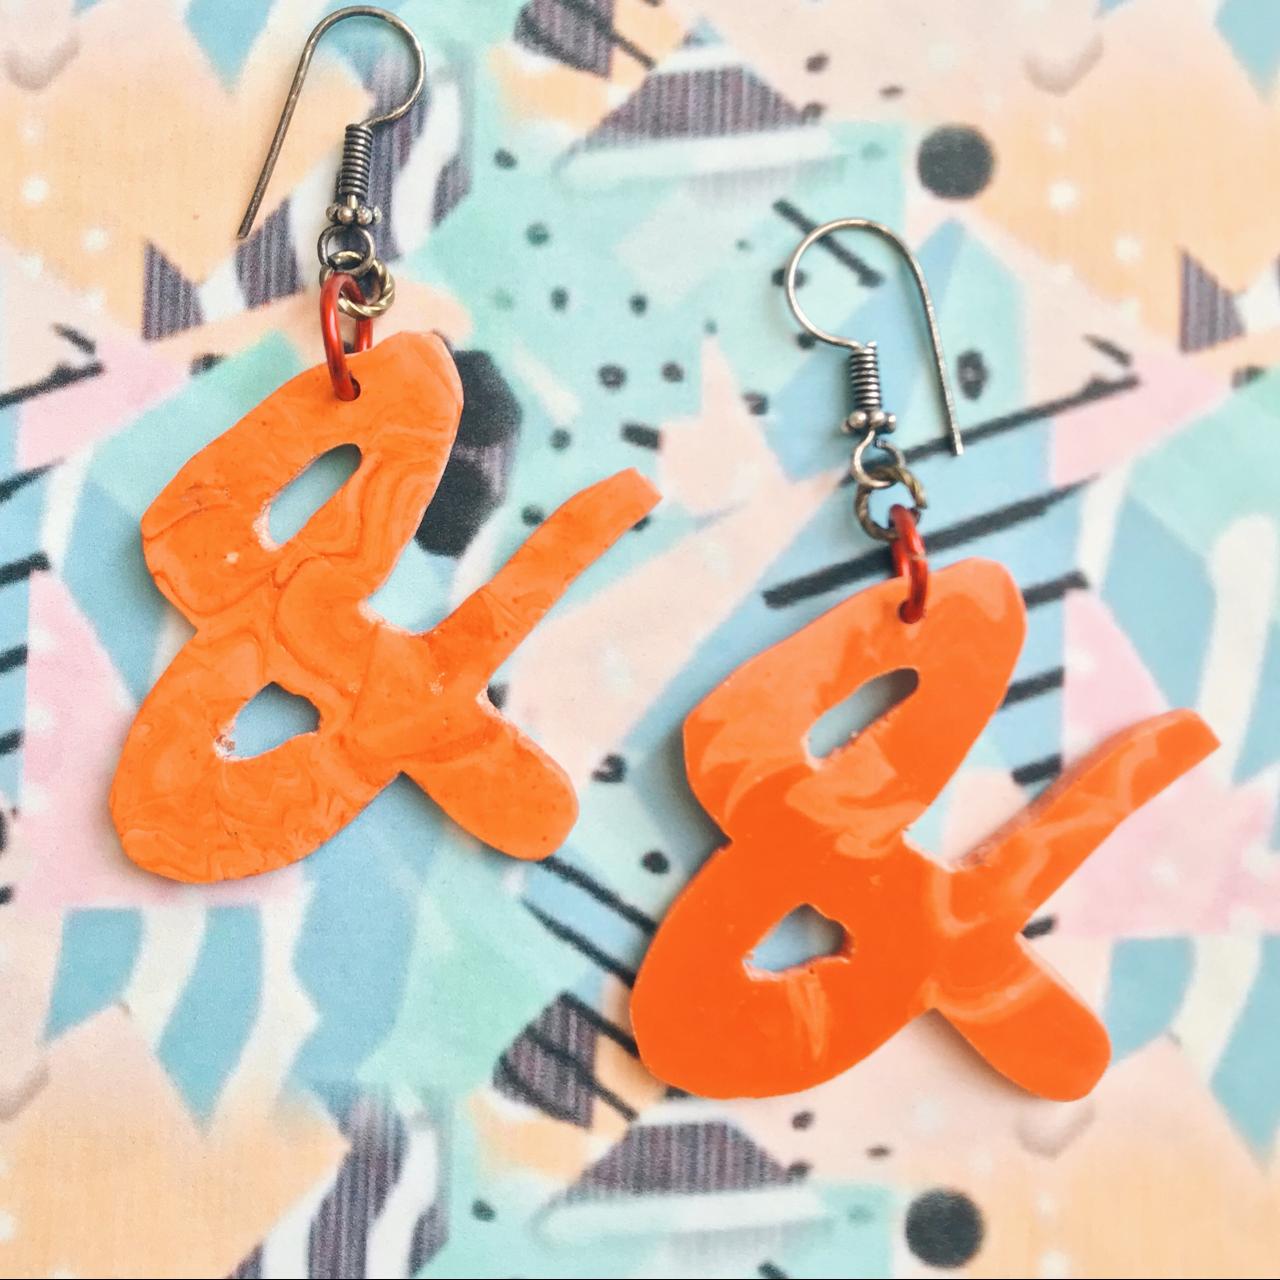 Product Image 1 - Orange Ampersand earrings
Unique doesn’t even